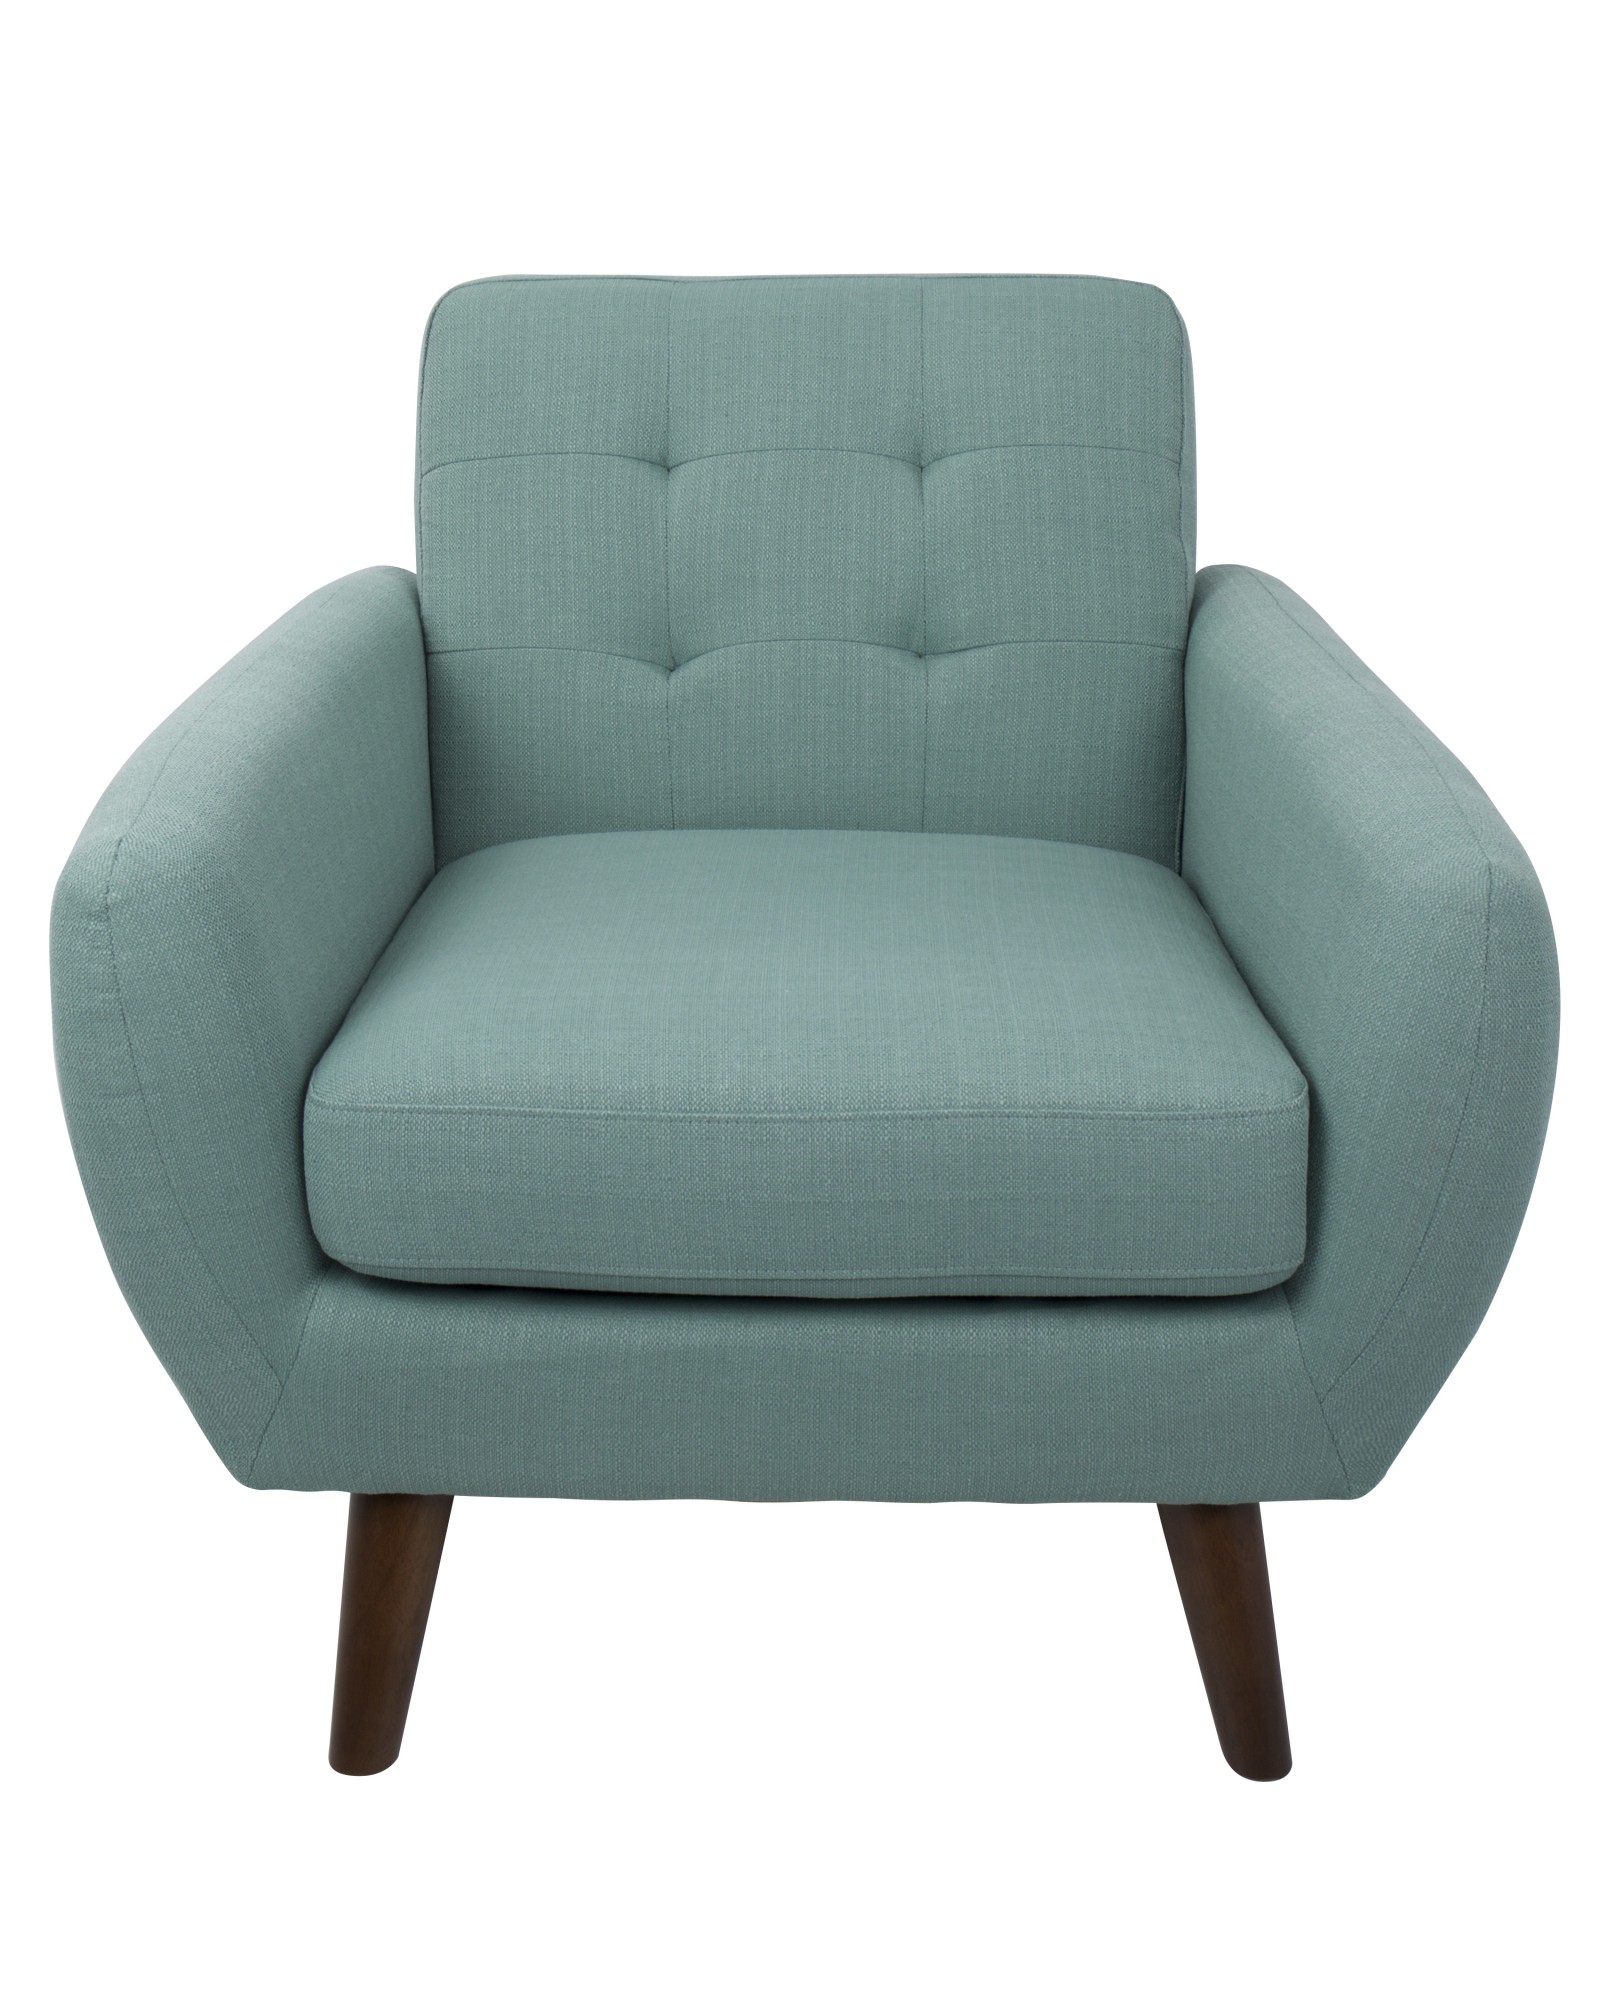 Hemingway Mid-Century Modern Accent Chair in Teal